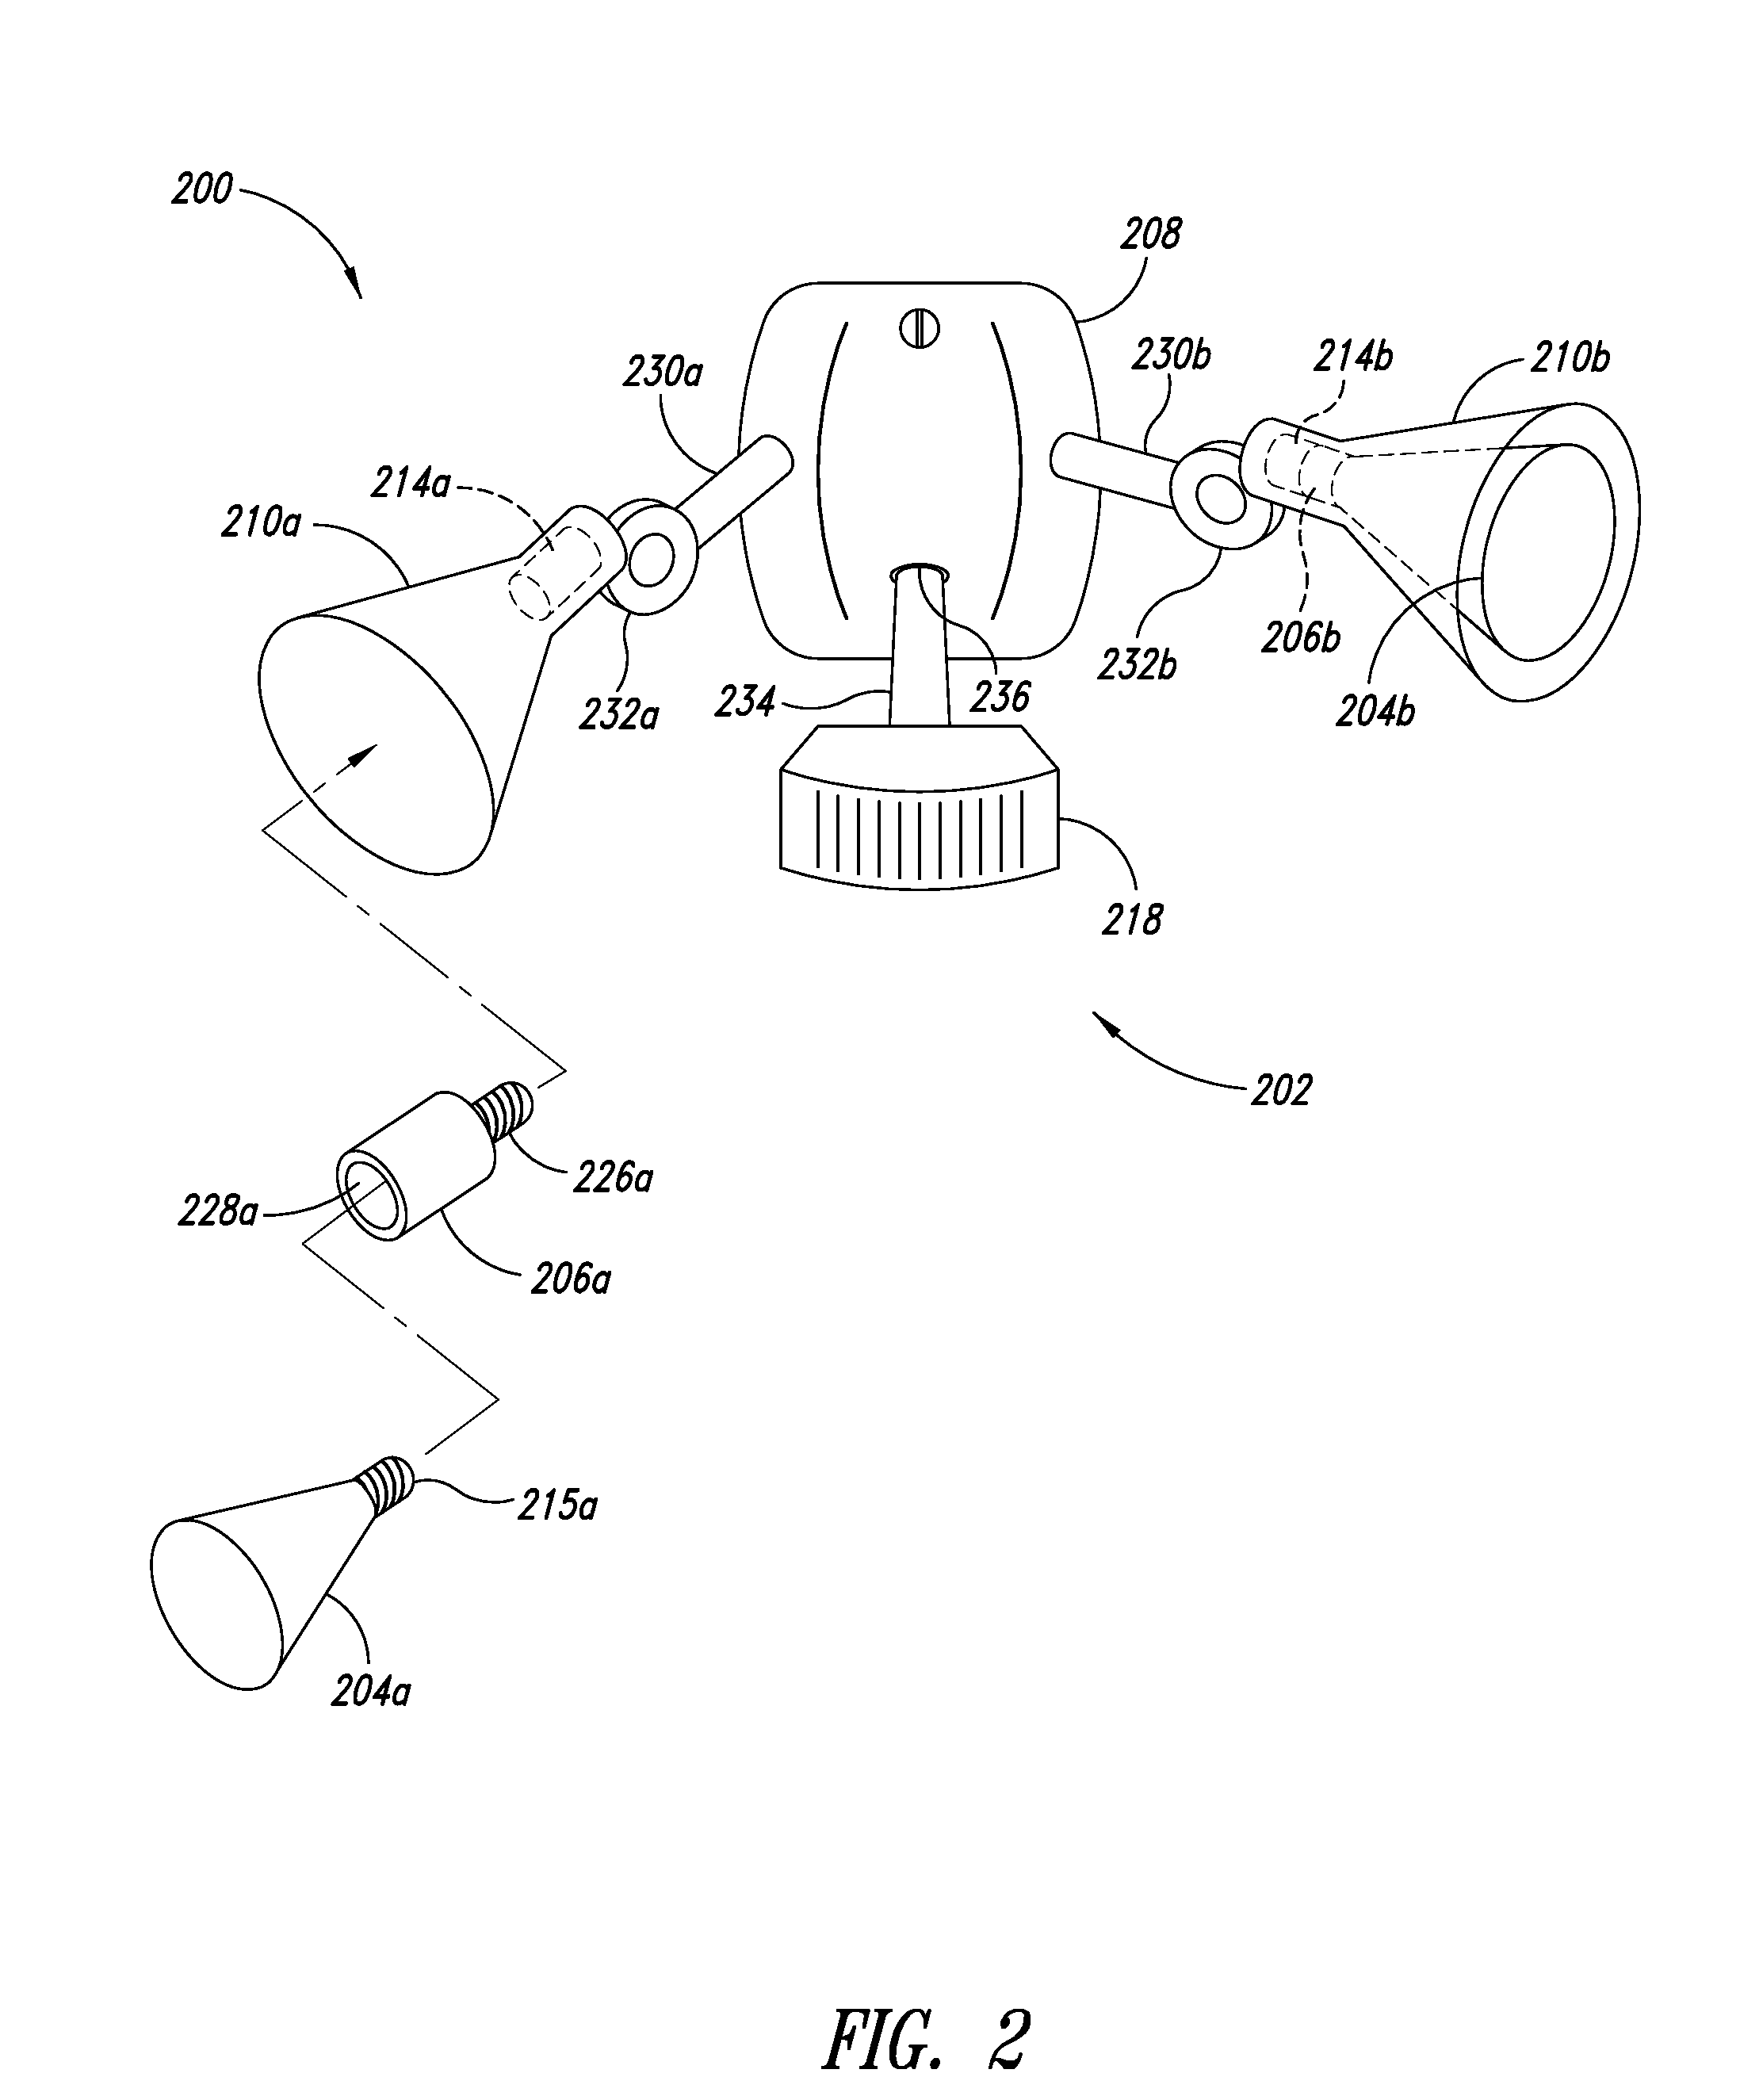 Apparatus and method of energy efficient illumination using received signals